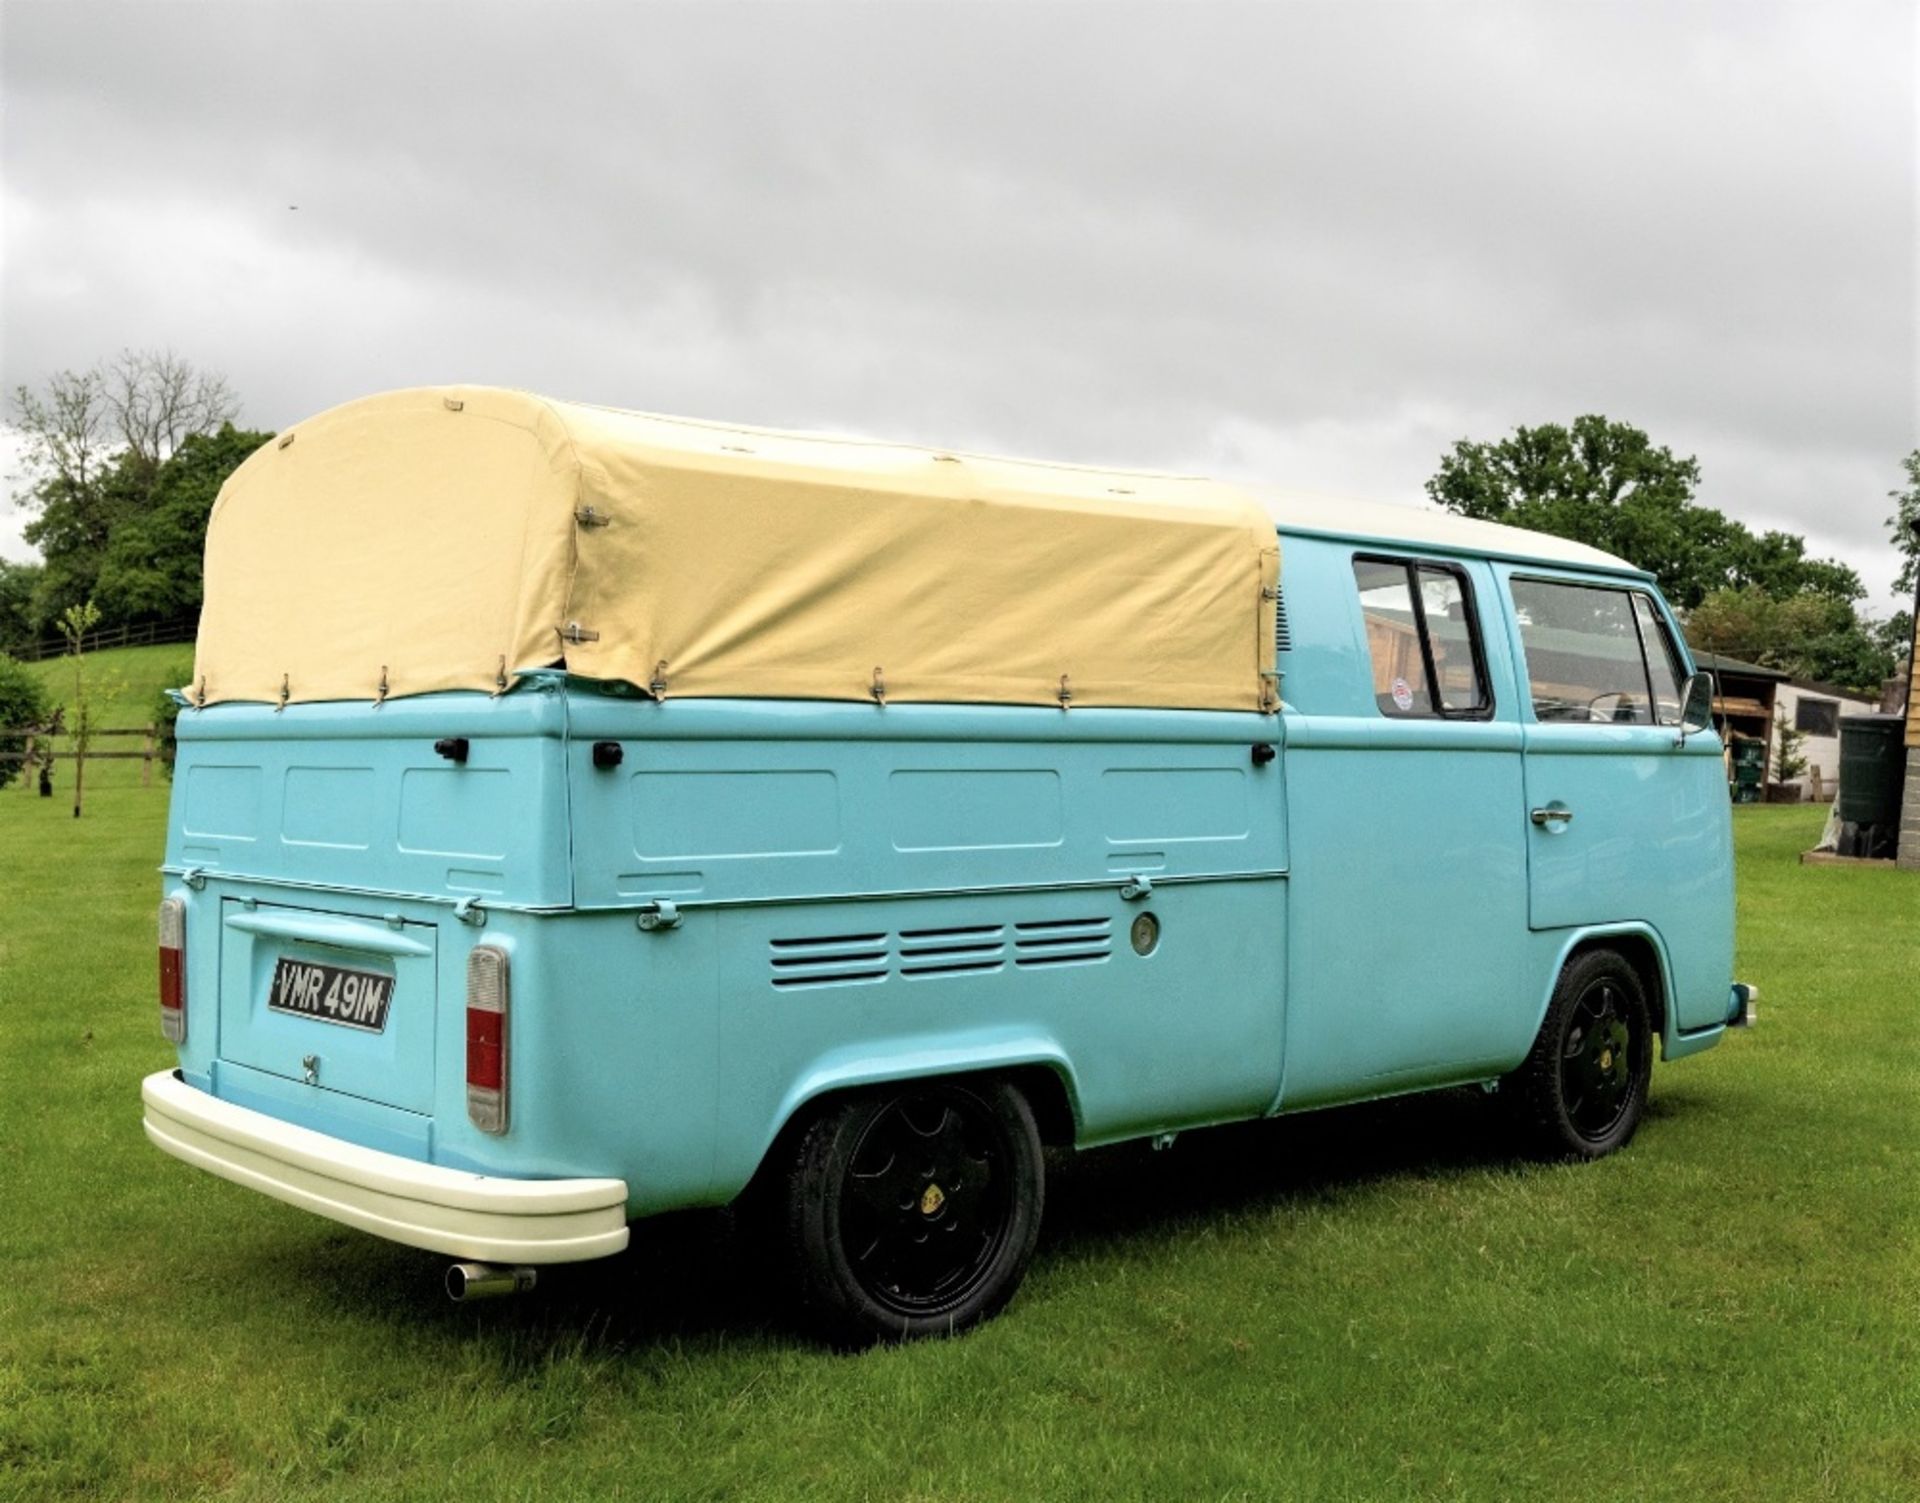 1974 VOLKSWAGEN TYPE 2 DOUBLE-CAB PICKUP Registration Number: VMR 491M Chassis Number: 2642-126- - Image 5 of 20